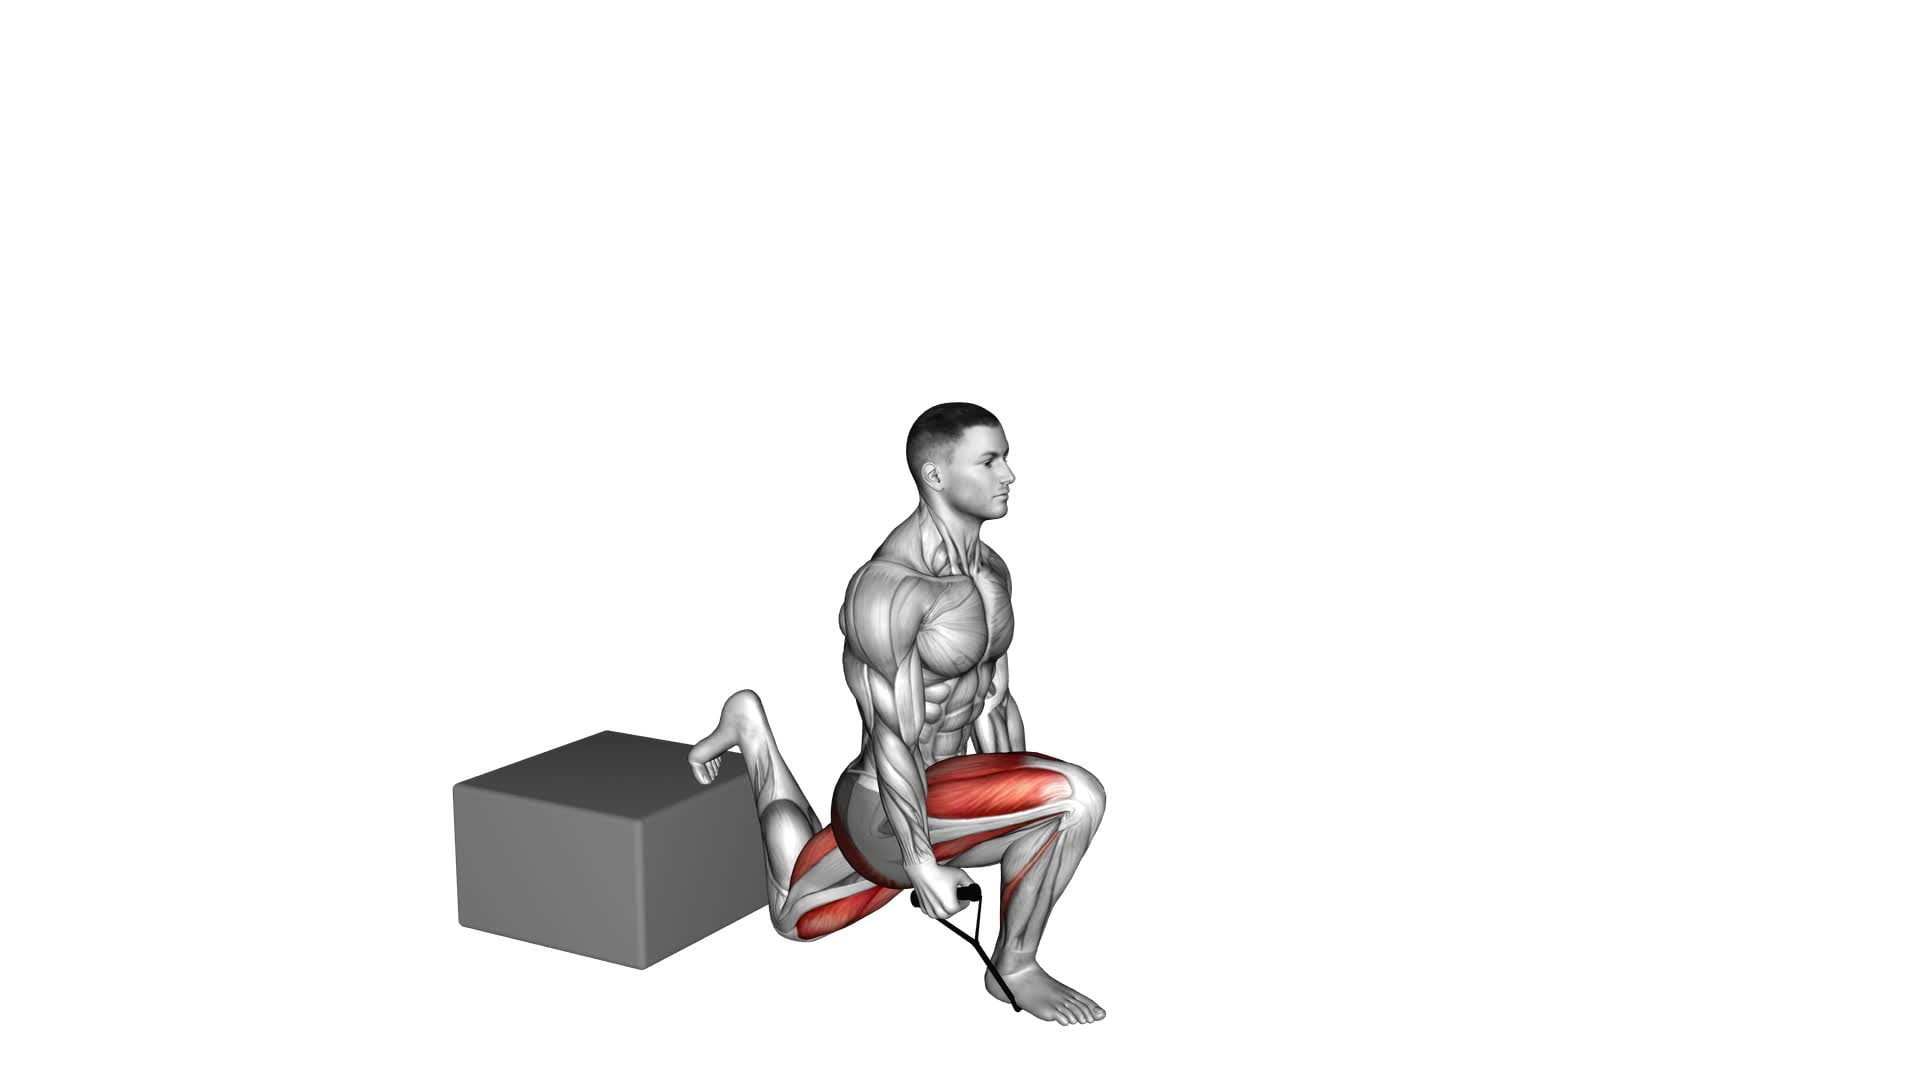 Band Single Leg Split Squat With Low Box - Video Exercise Guide & Tips